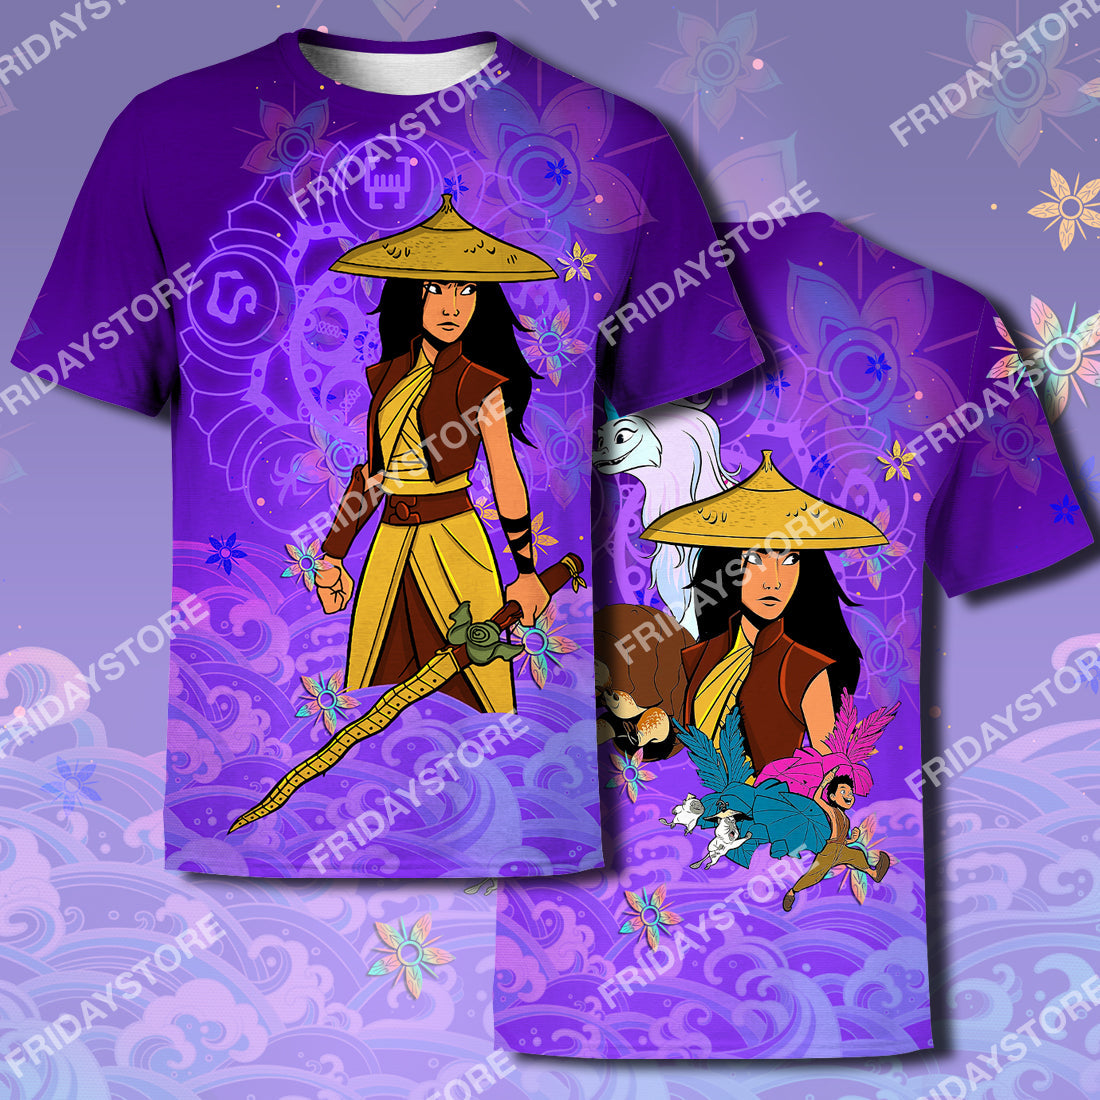 Unifinz DN T-shirt Princess And The Last Dragon T-shirt Awesome High Quality DN Shirt Sweater Tank 2026